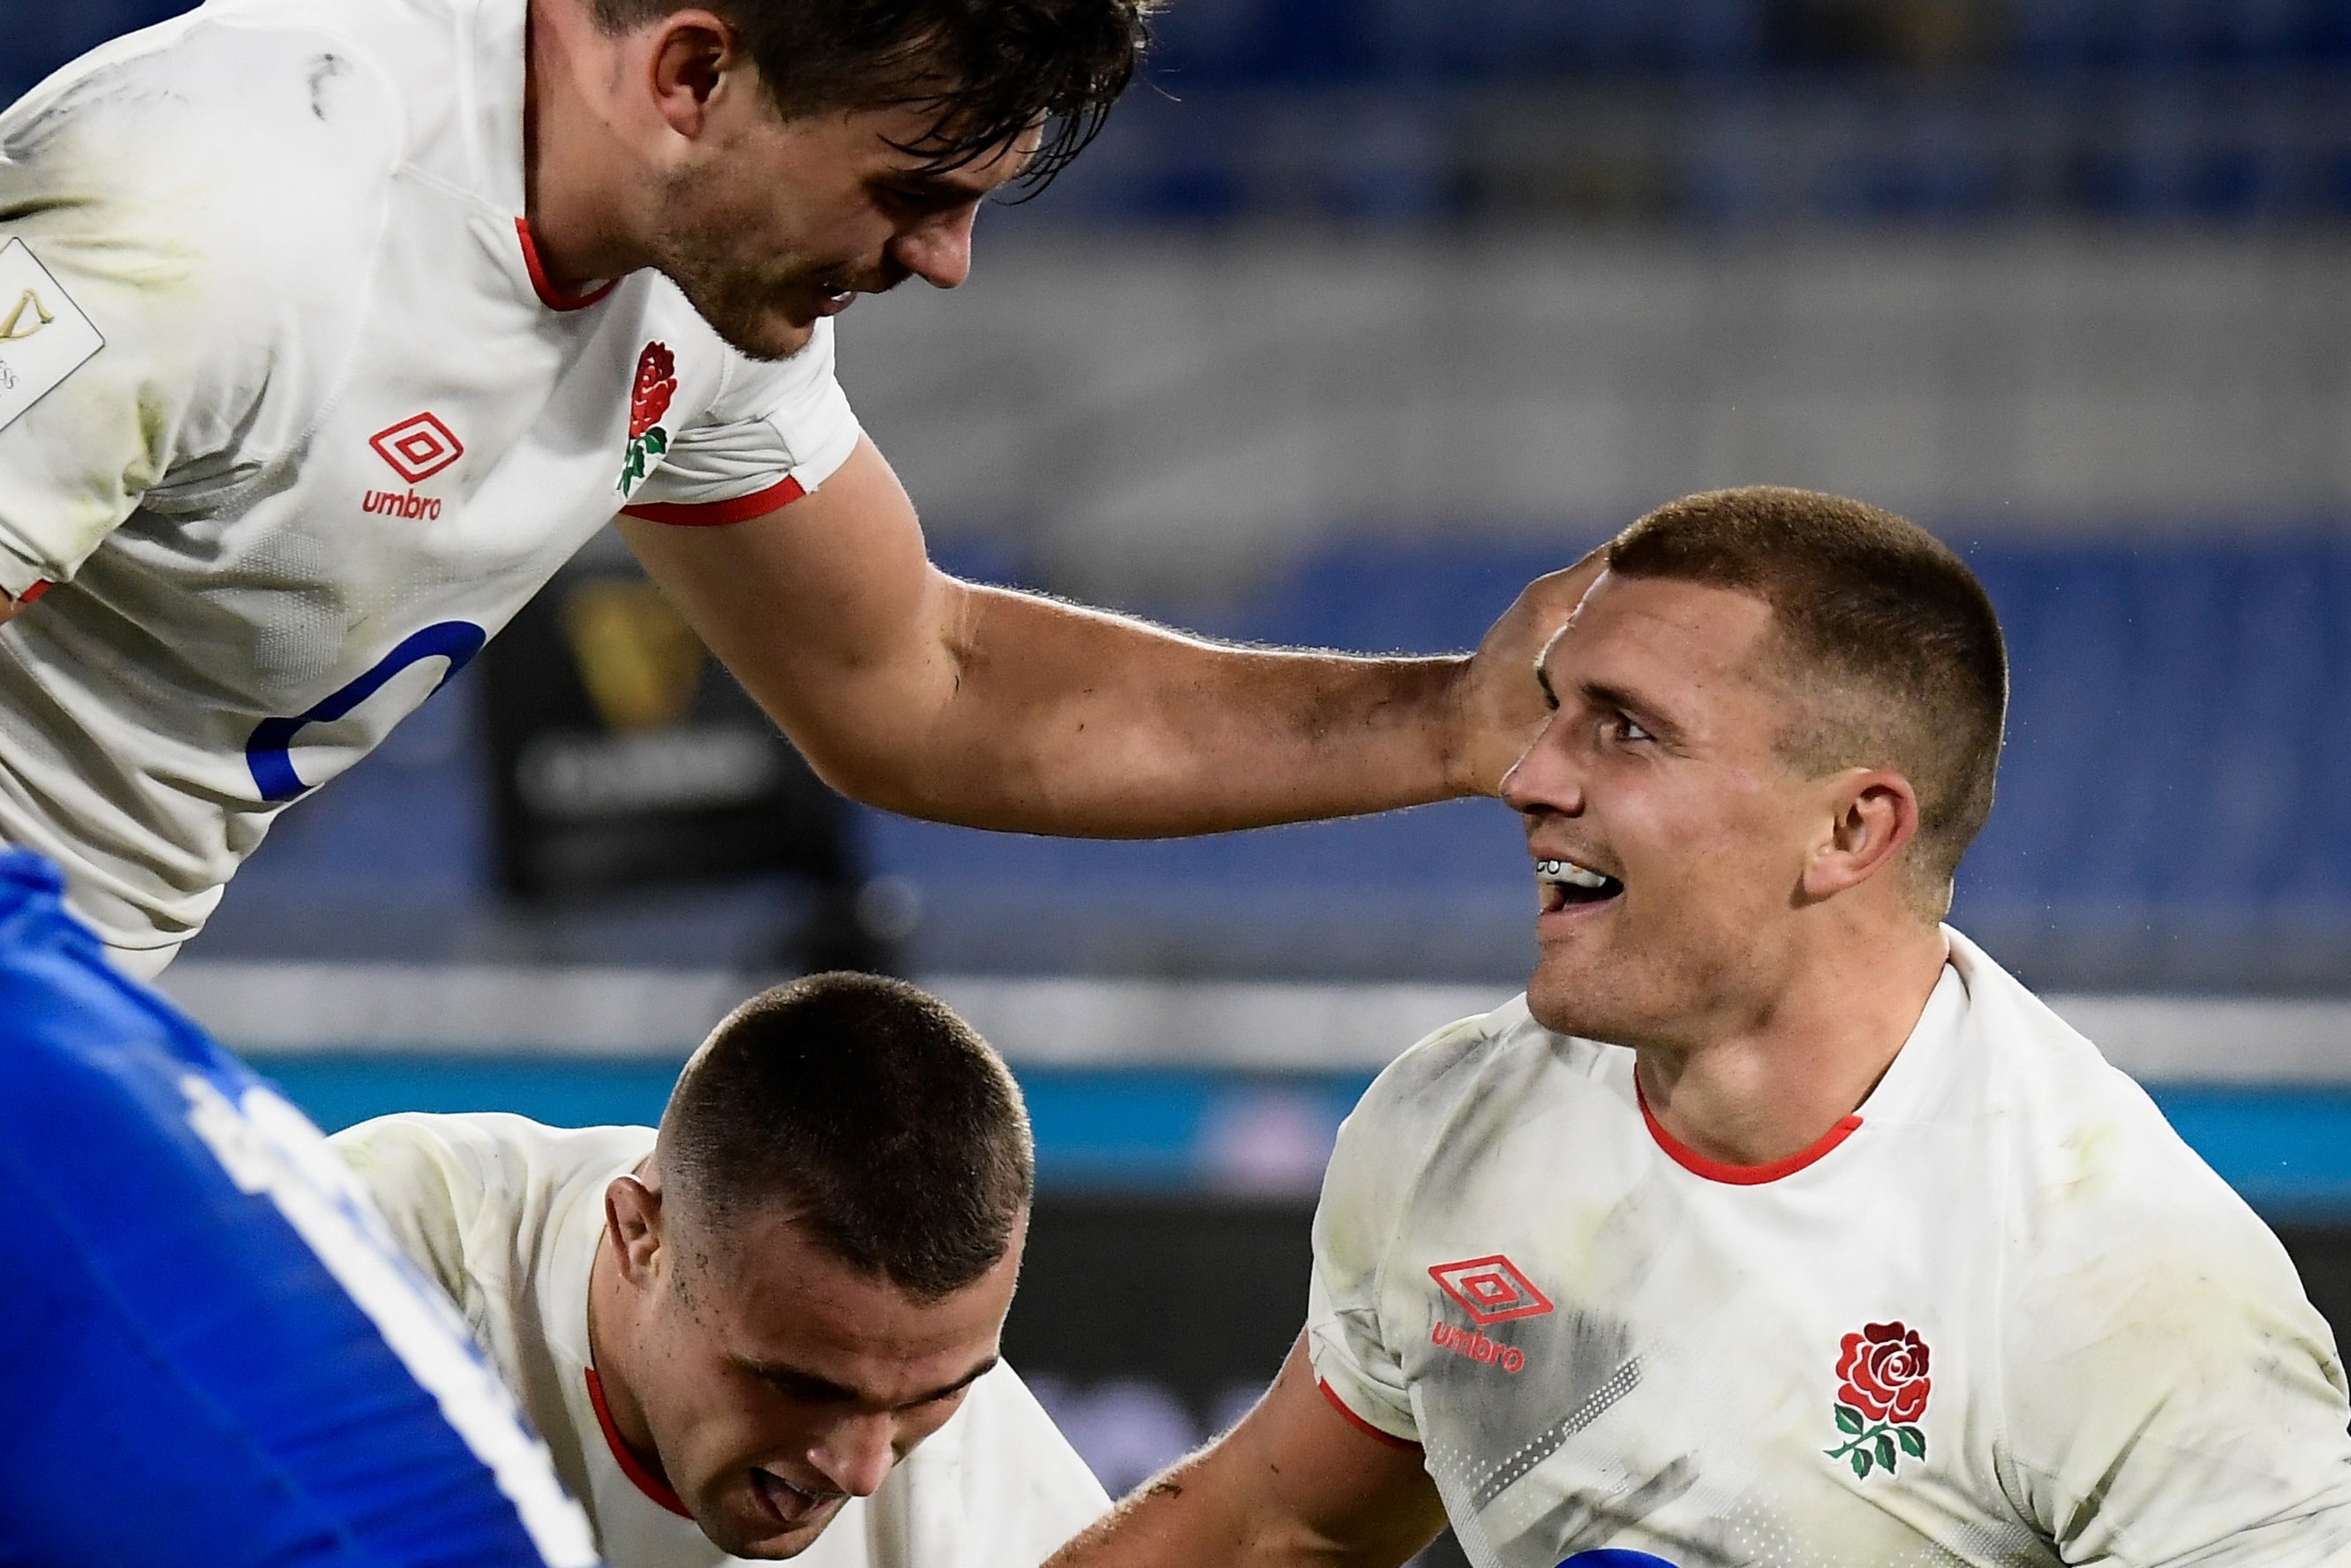 England have helped to put smiles on faces with their Six Nations triumph